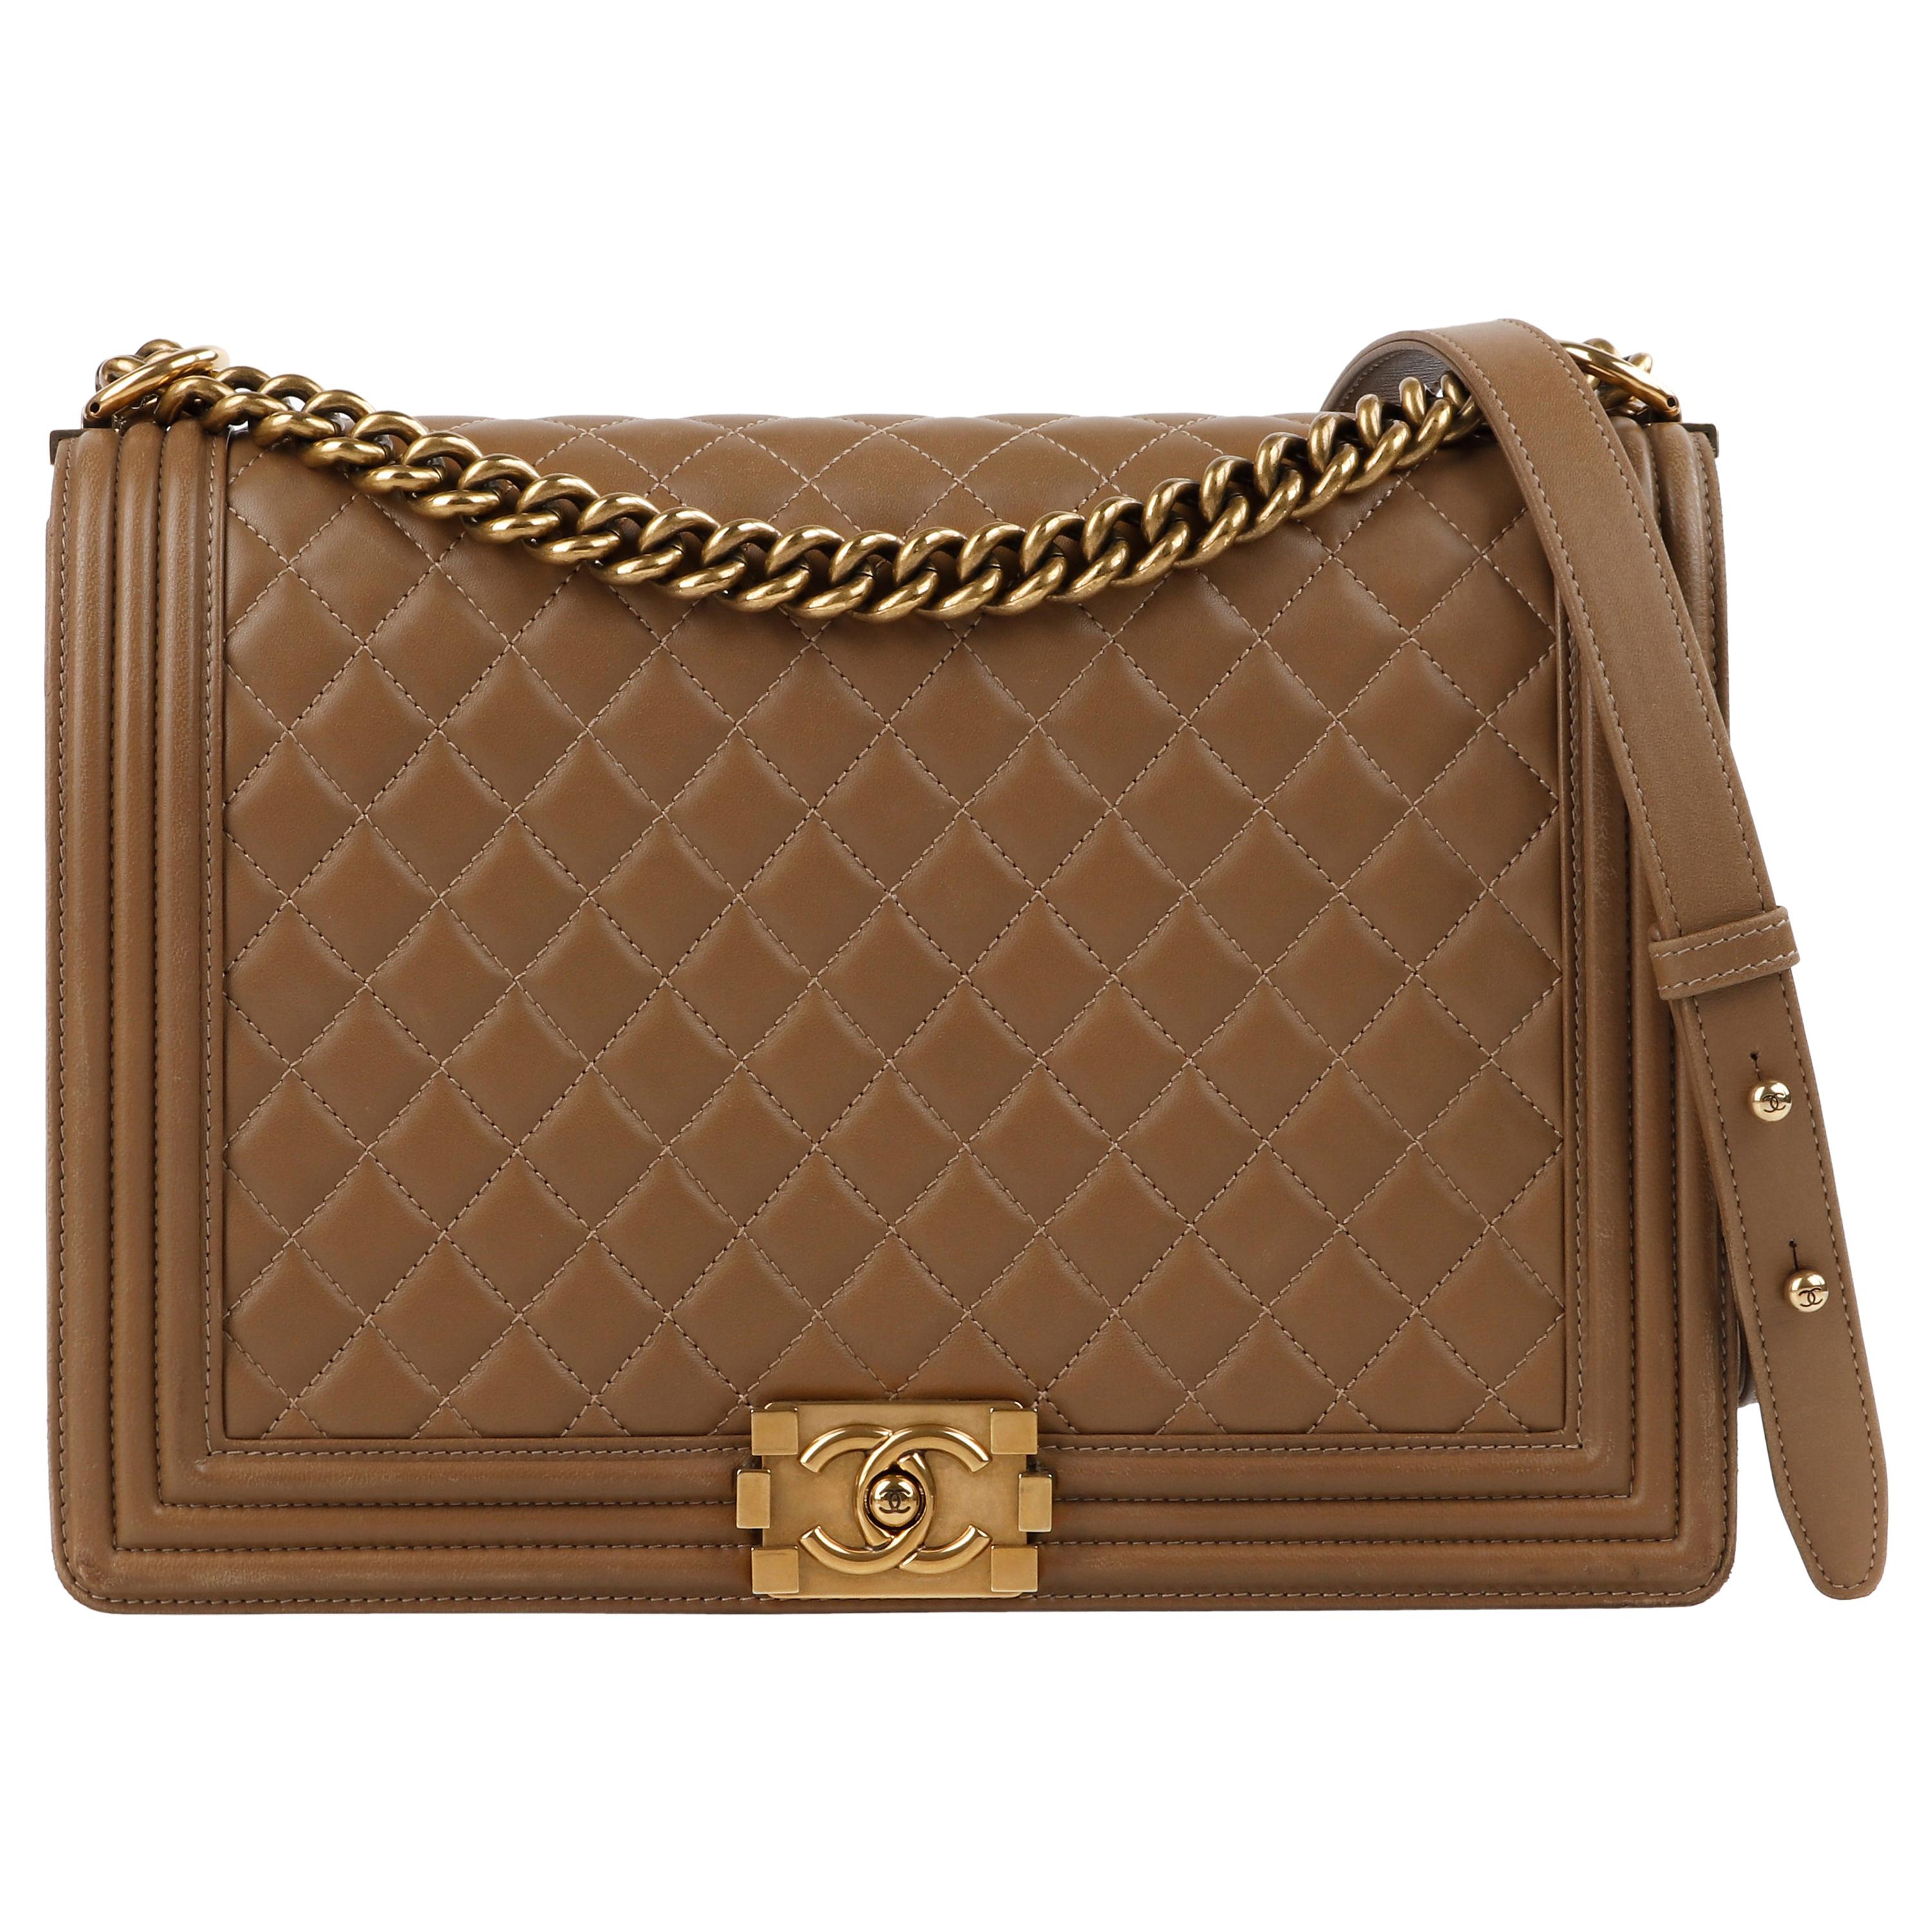 CHANEL c.2014 “Boy” Tan Quilted Leather Gold Hardware Cross-body Shoulder Bag